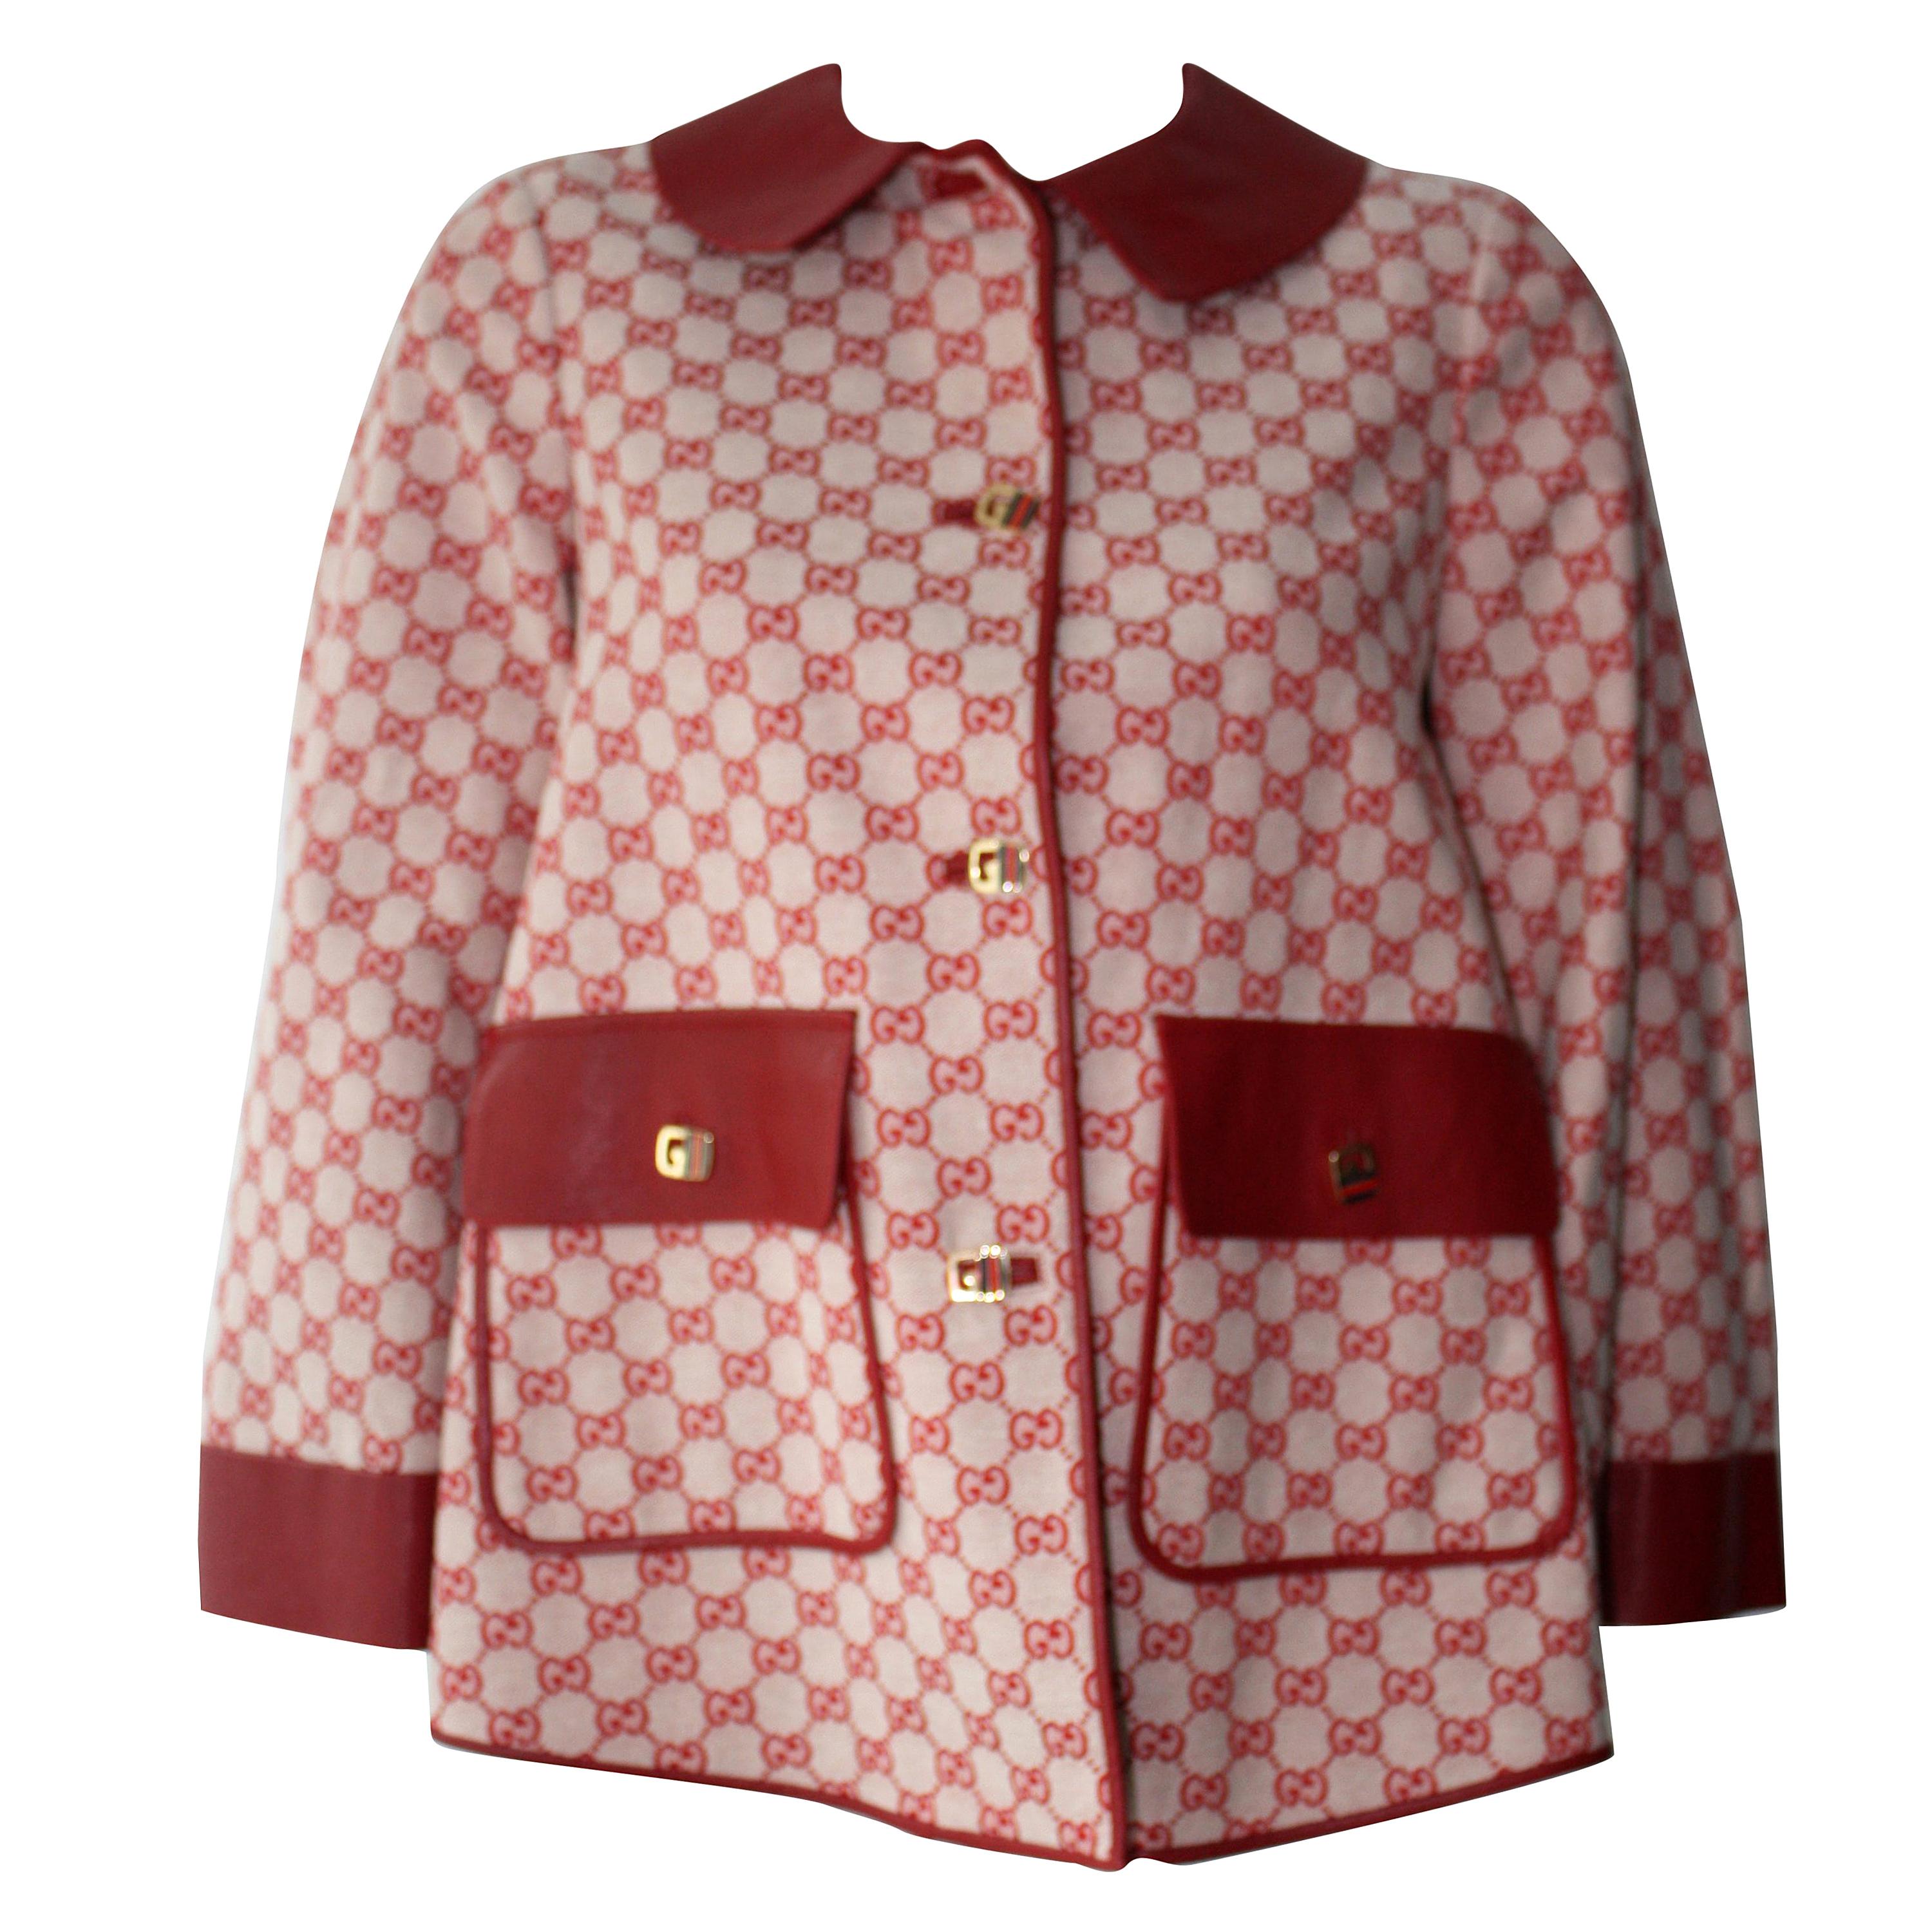 GUCCI 2018 RED LOGO Swing Jacket (Sold out) Size 40  For Sale